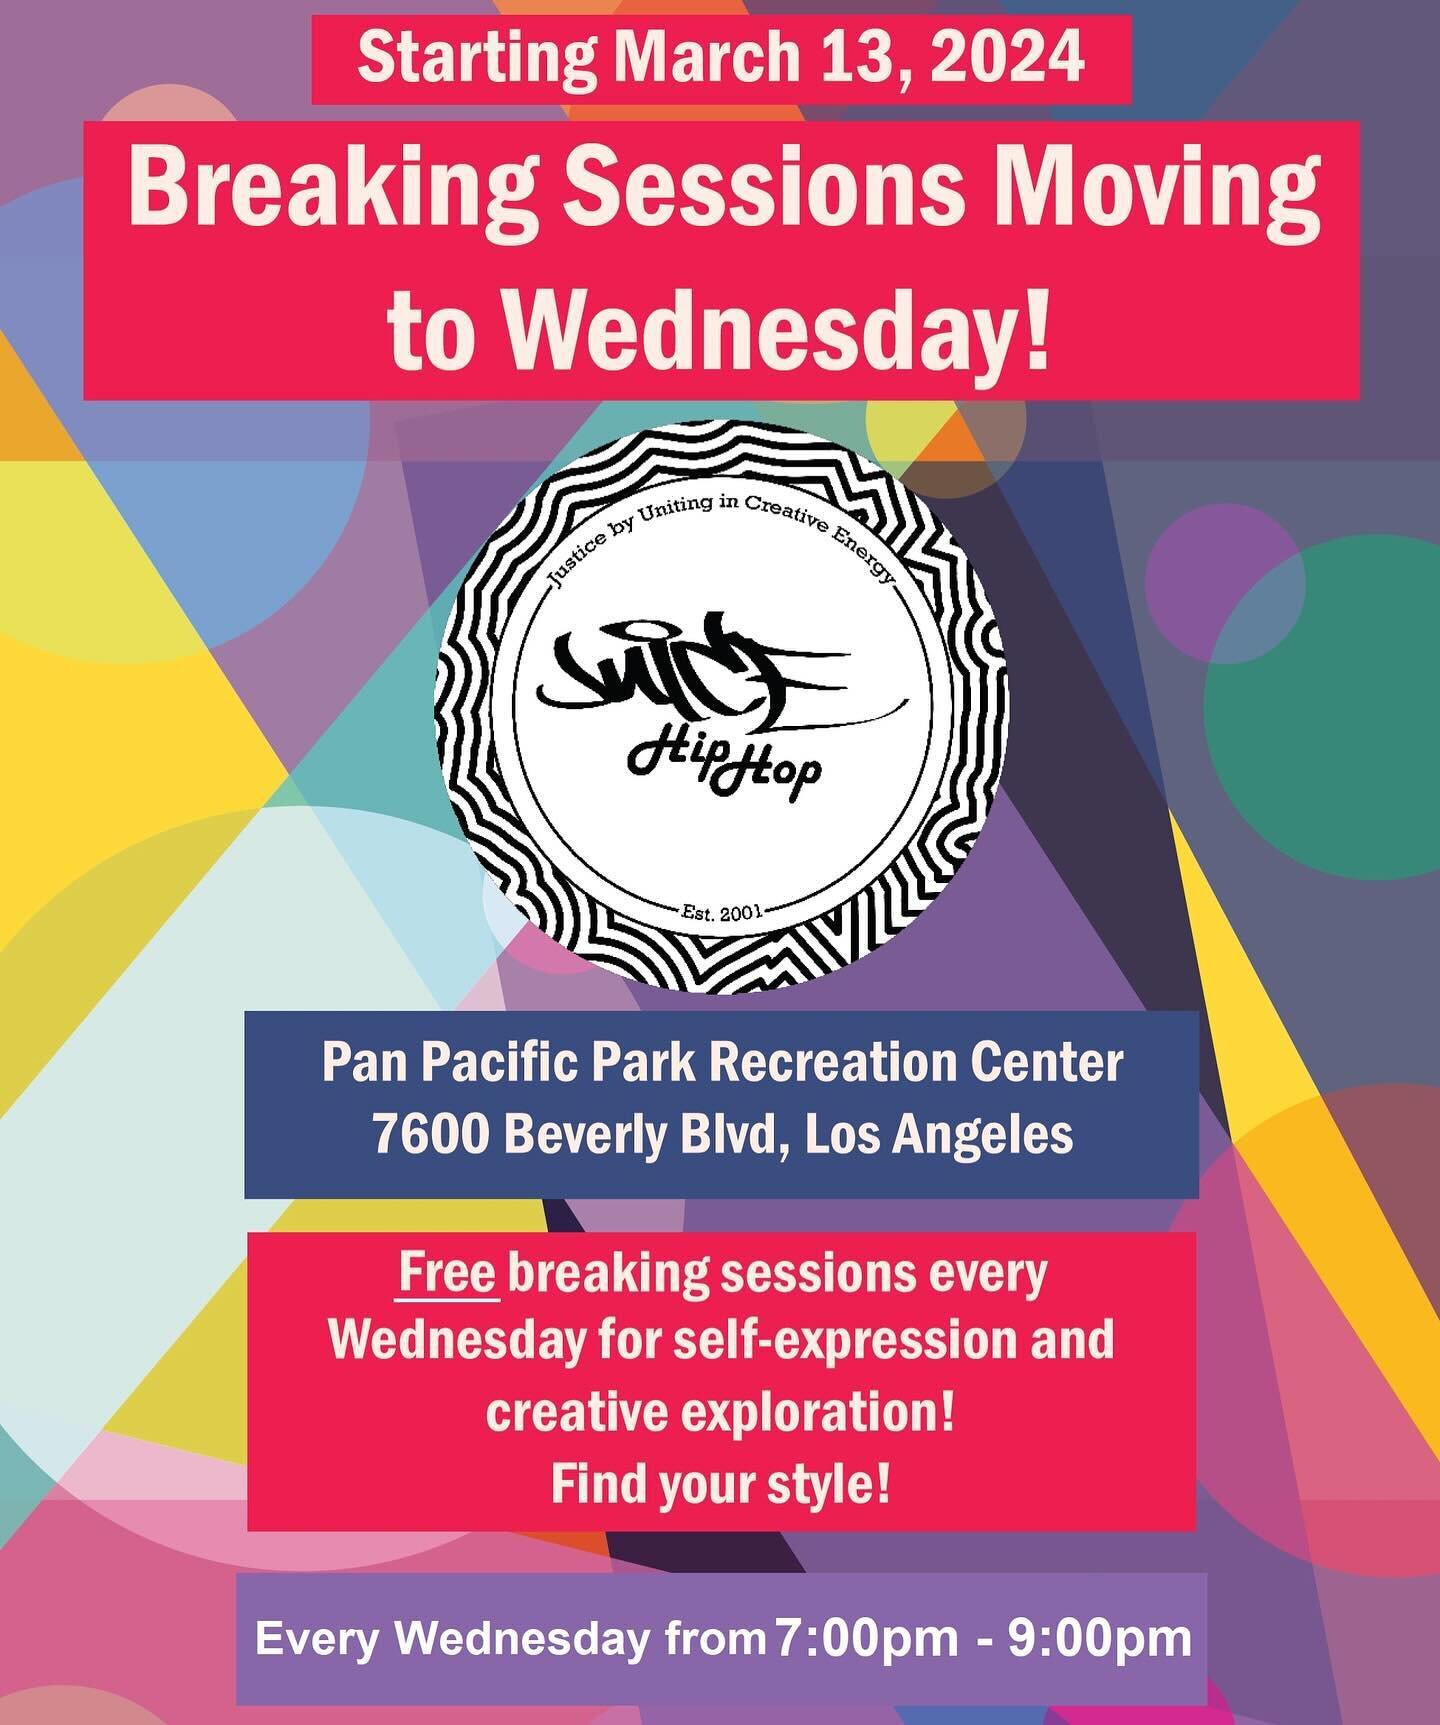 Starting this week, Wednesdays will be our new weekly programming day at Pan Pacific Park Recreation Center from 7pm-9pm. We will no longer have open sessions on Tuesday evenings. Our open breaking sessions are free for everyone to come through to bu